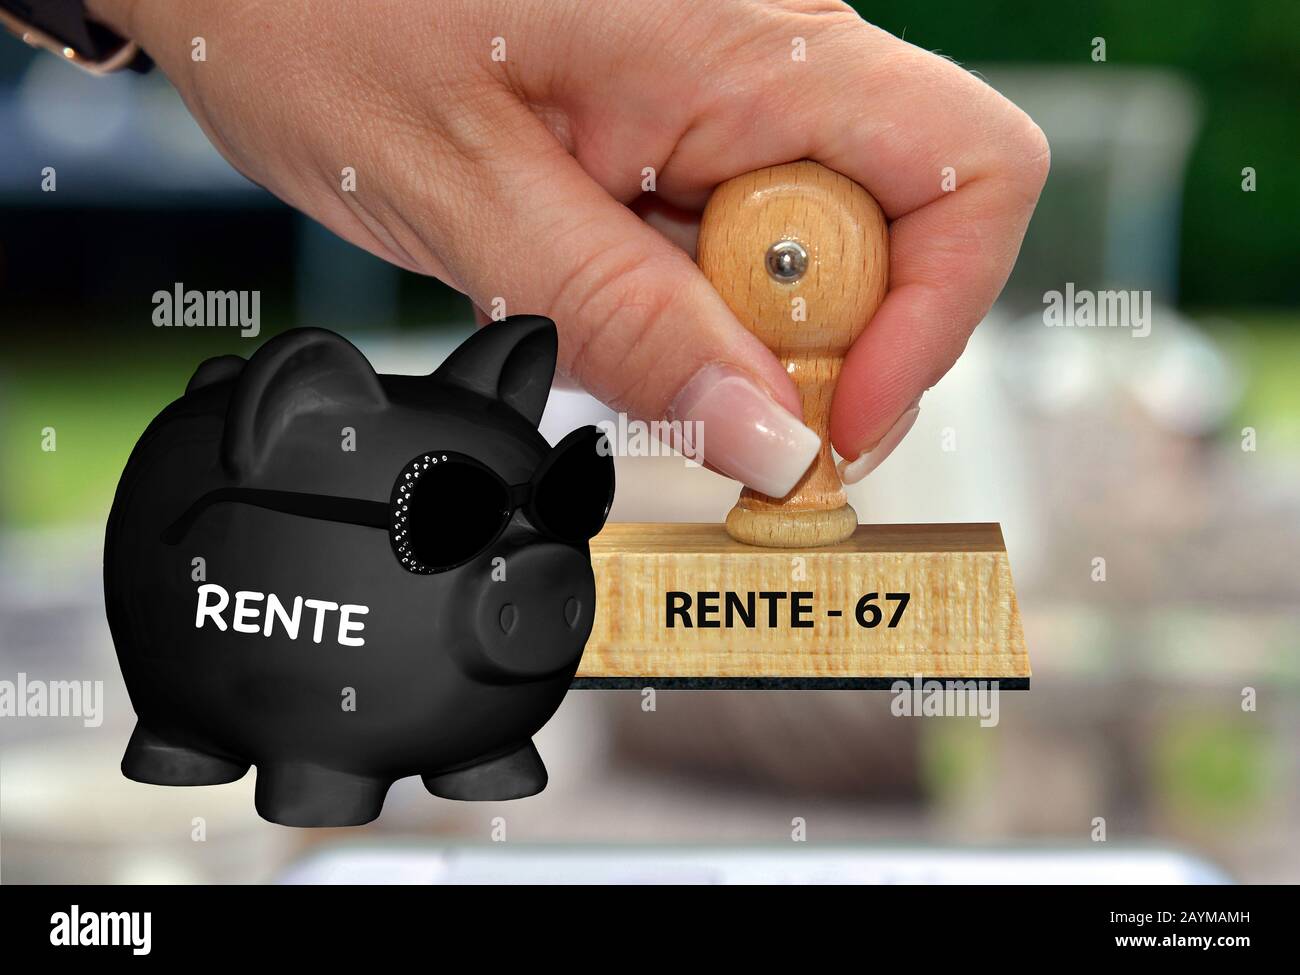 black piggy bank with sunglasses and lettering Rente, stamp 'pension - 67' in background, composing Stock Photo